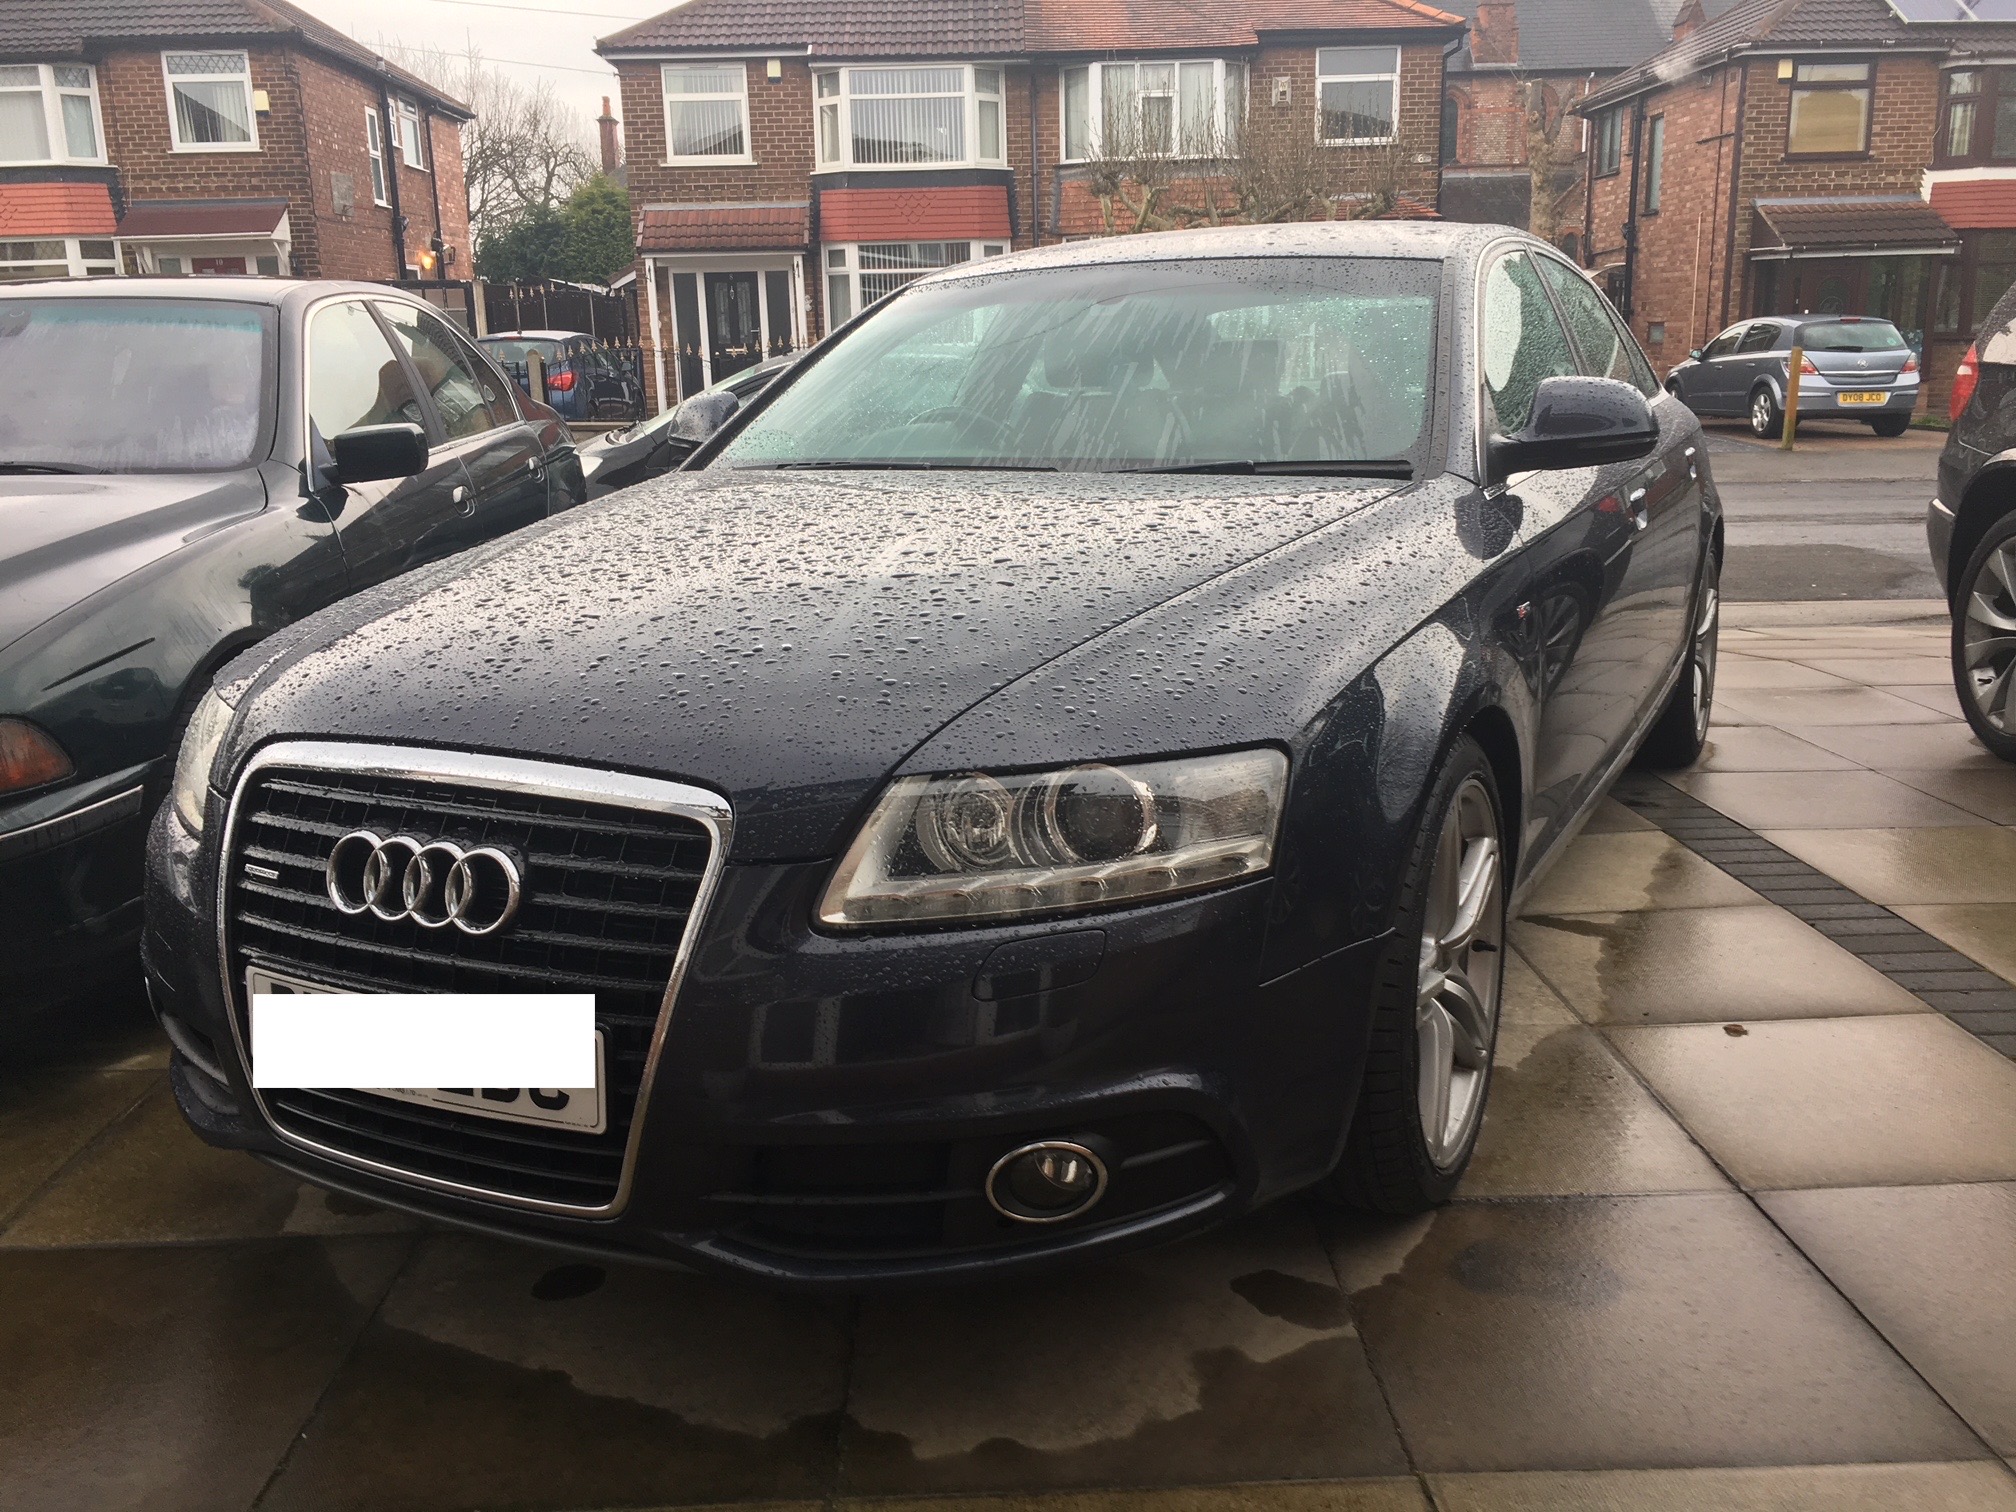 Supercharged V6 City Car - Audi A6 3.0TFSI - Page 1 - Readers' Cars - PistonHeads